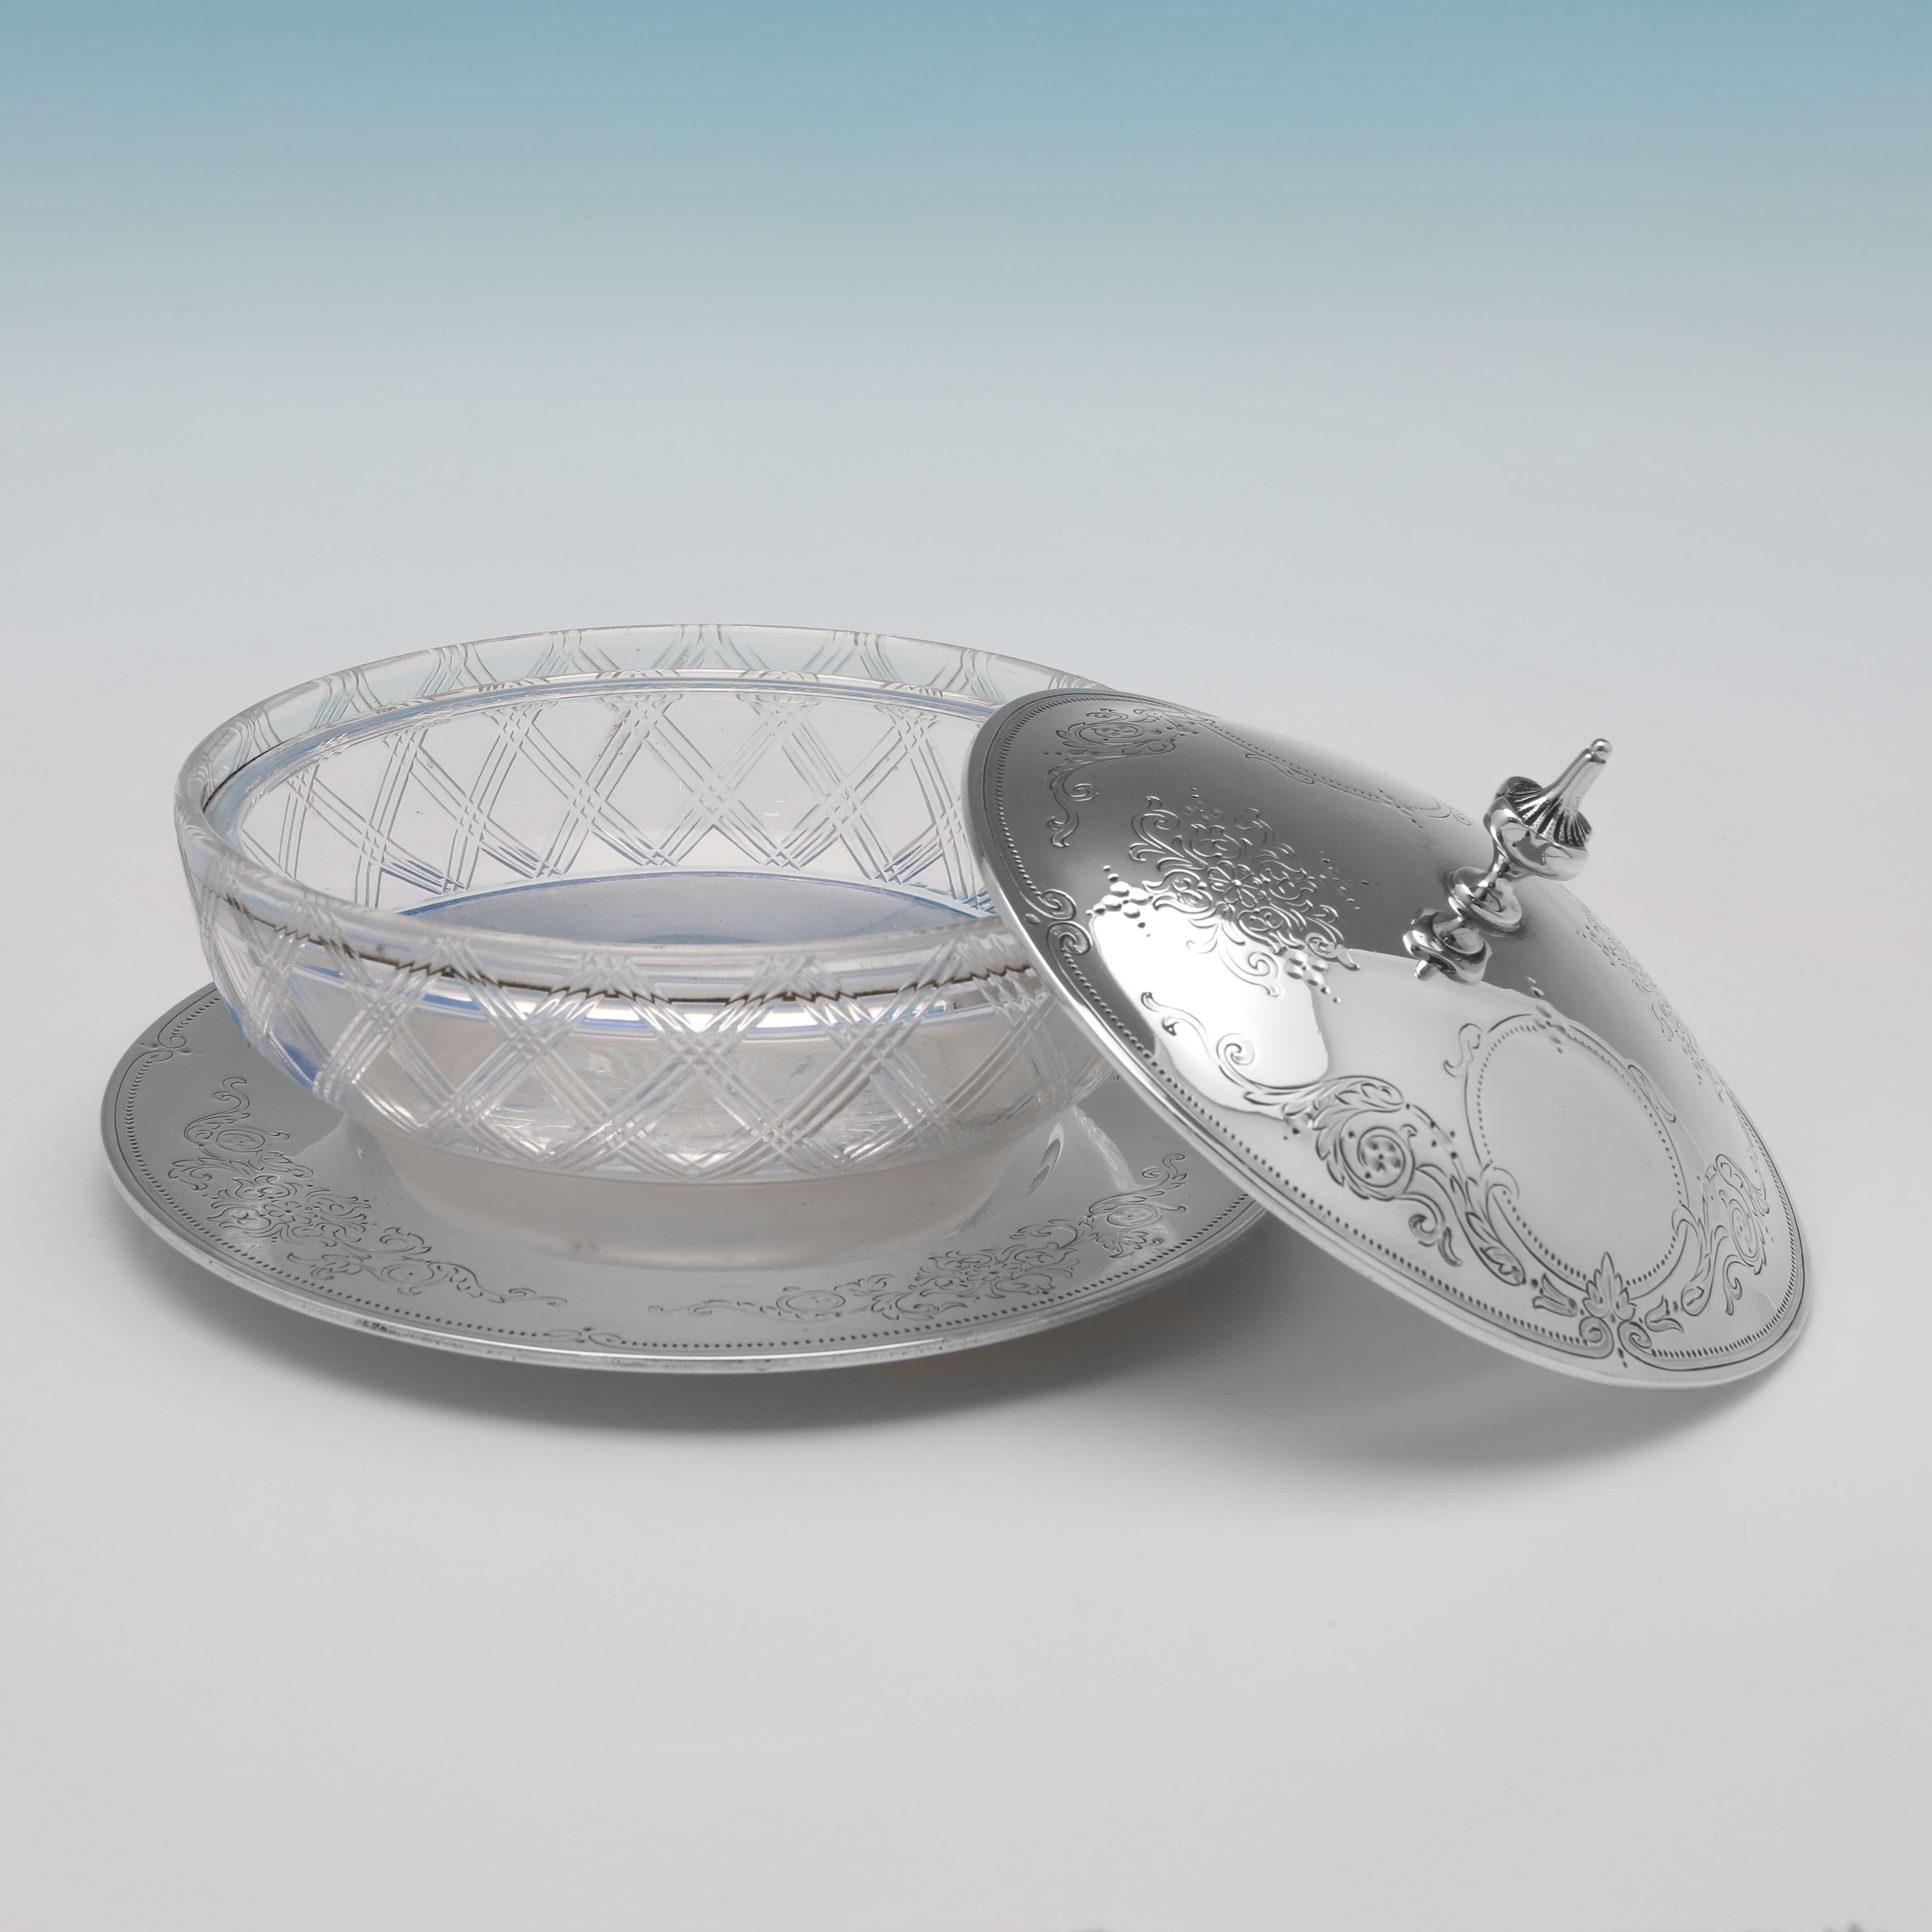 Hallmarked in London in 1866 by George Angell, this very attractive, Victorian, antique sterling silver butter dish, features an engraved silver lid and base, with a cross hatched cut glass body. The butter dish measures 4